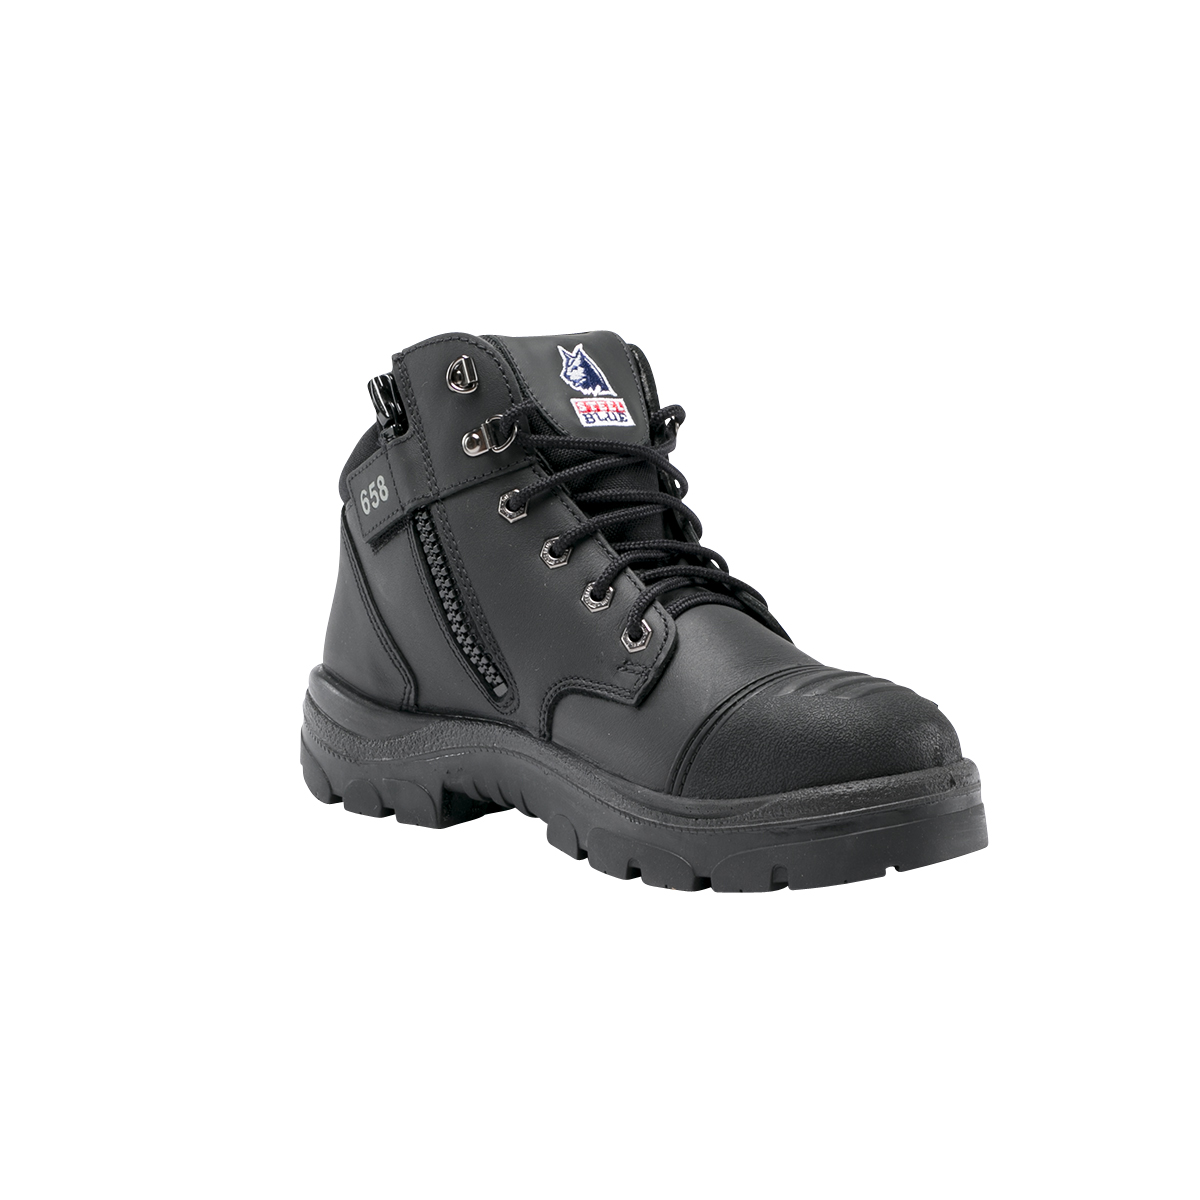 SAFETY BOOT PARKES BLACK S10 ZIP SIDED ANKLE SCUFF CAP